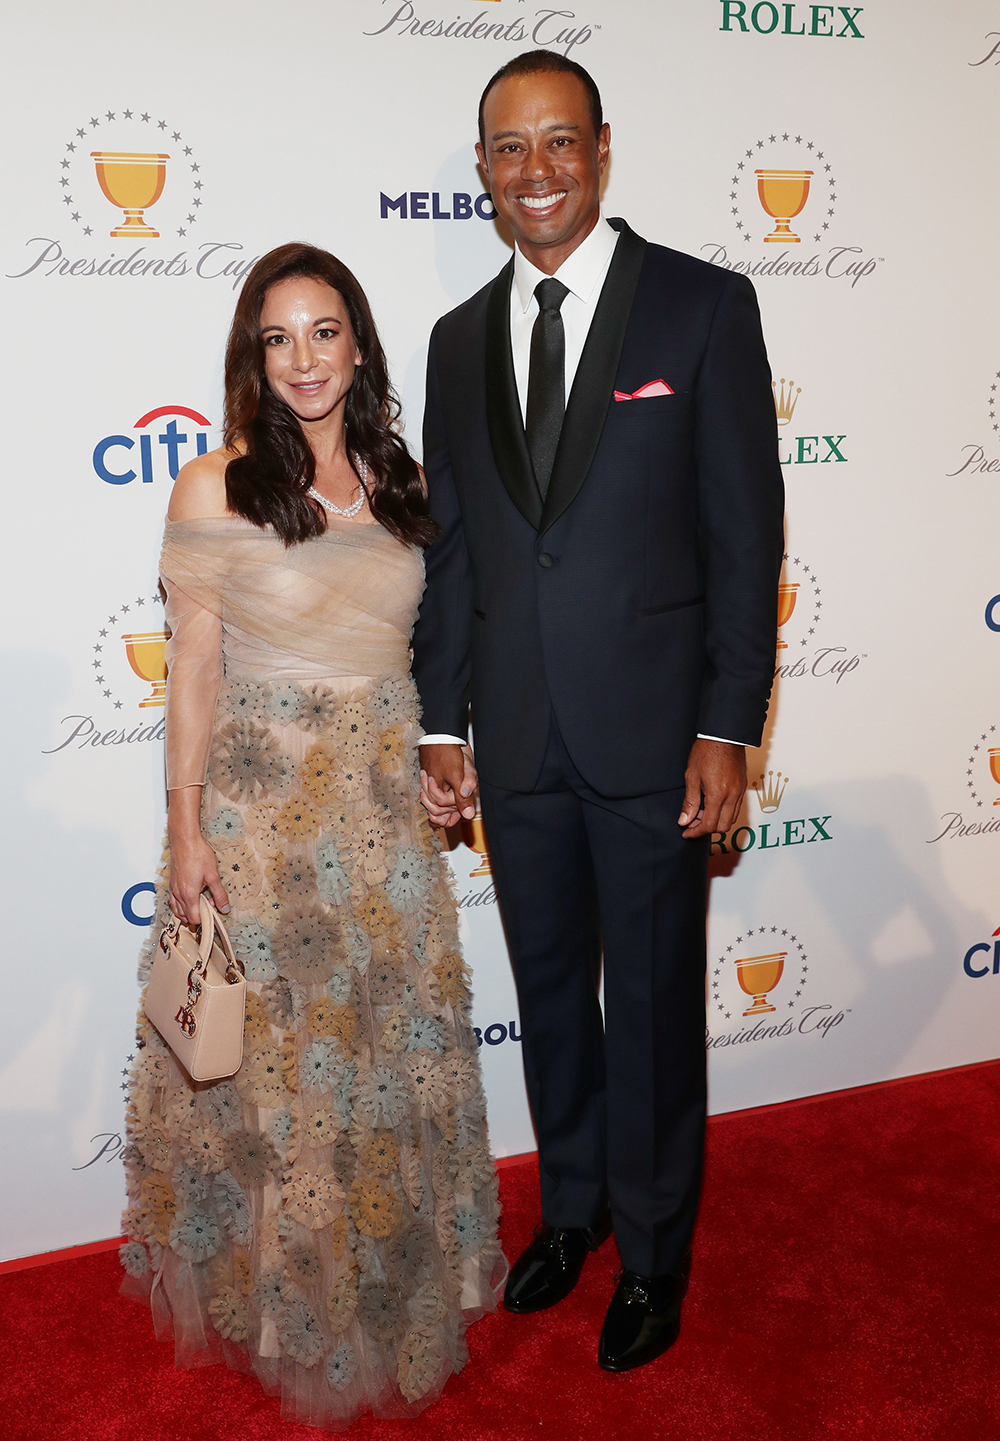 Tiger Woods and Erica Herman – Pics Of The Couple image